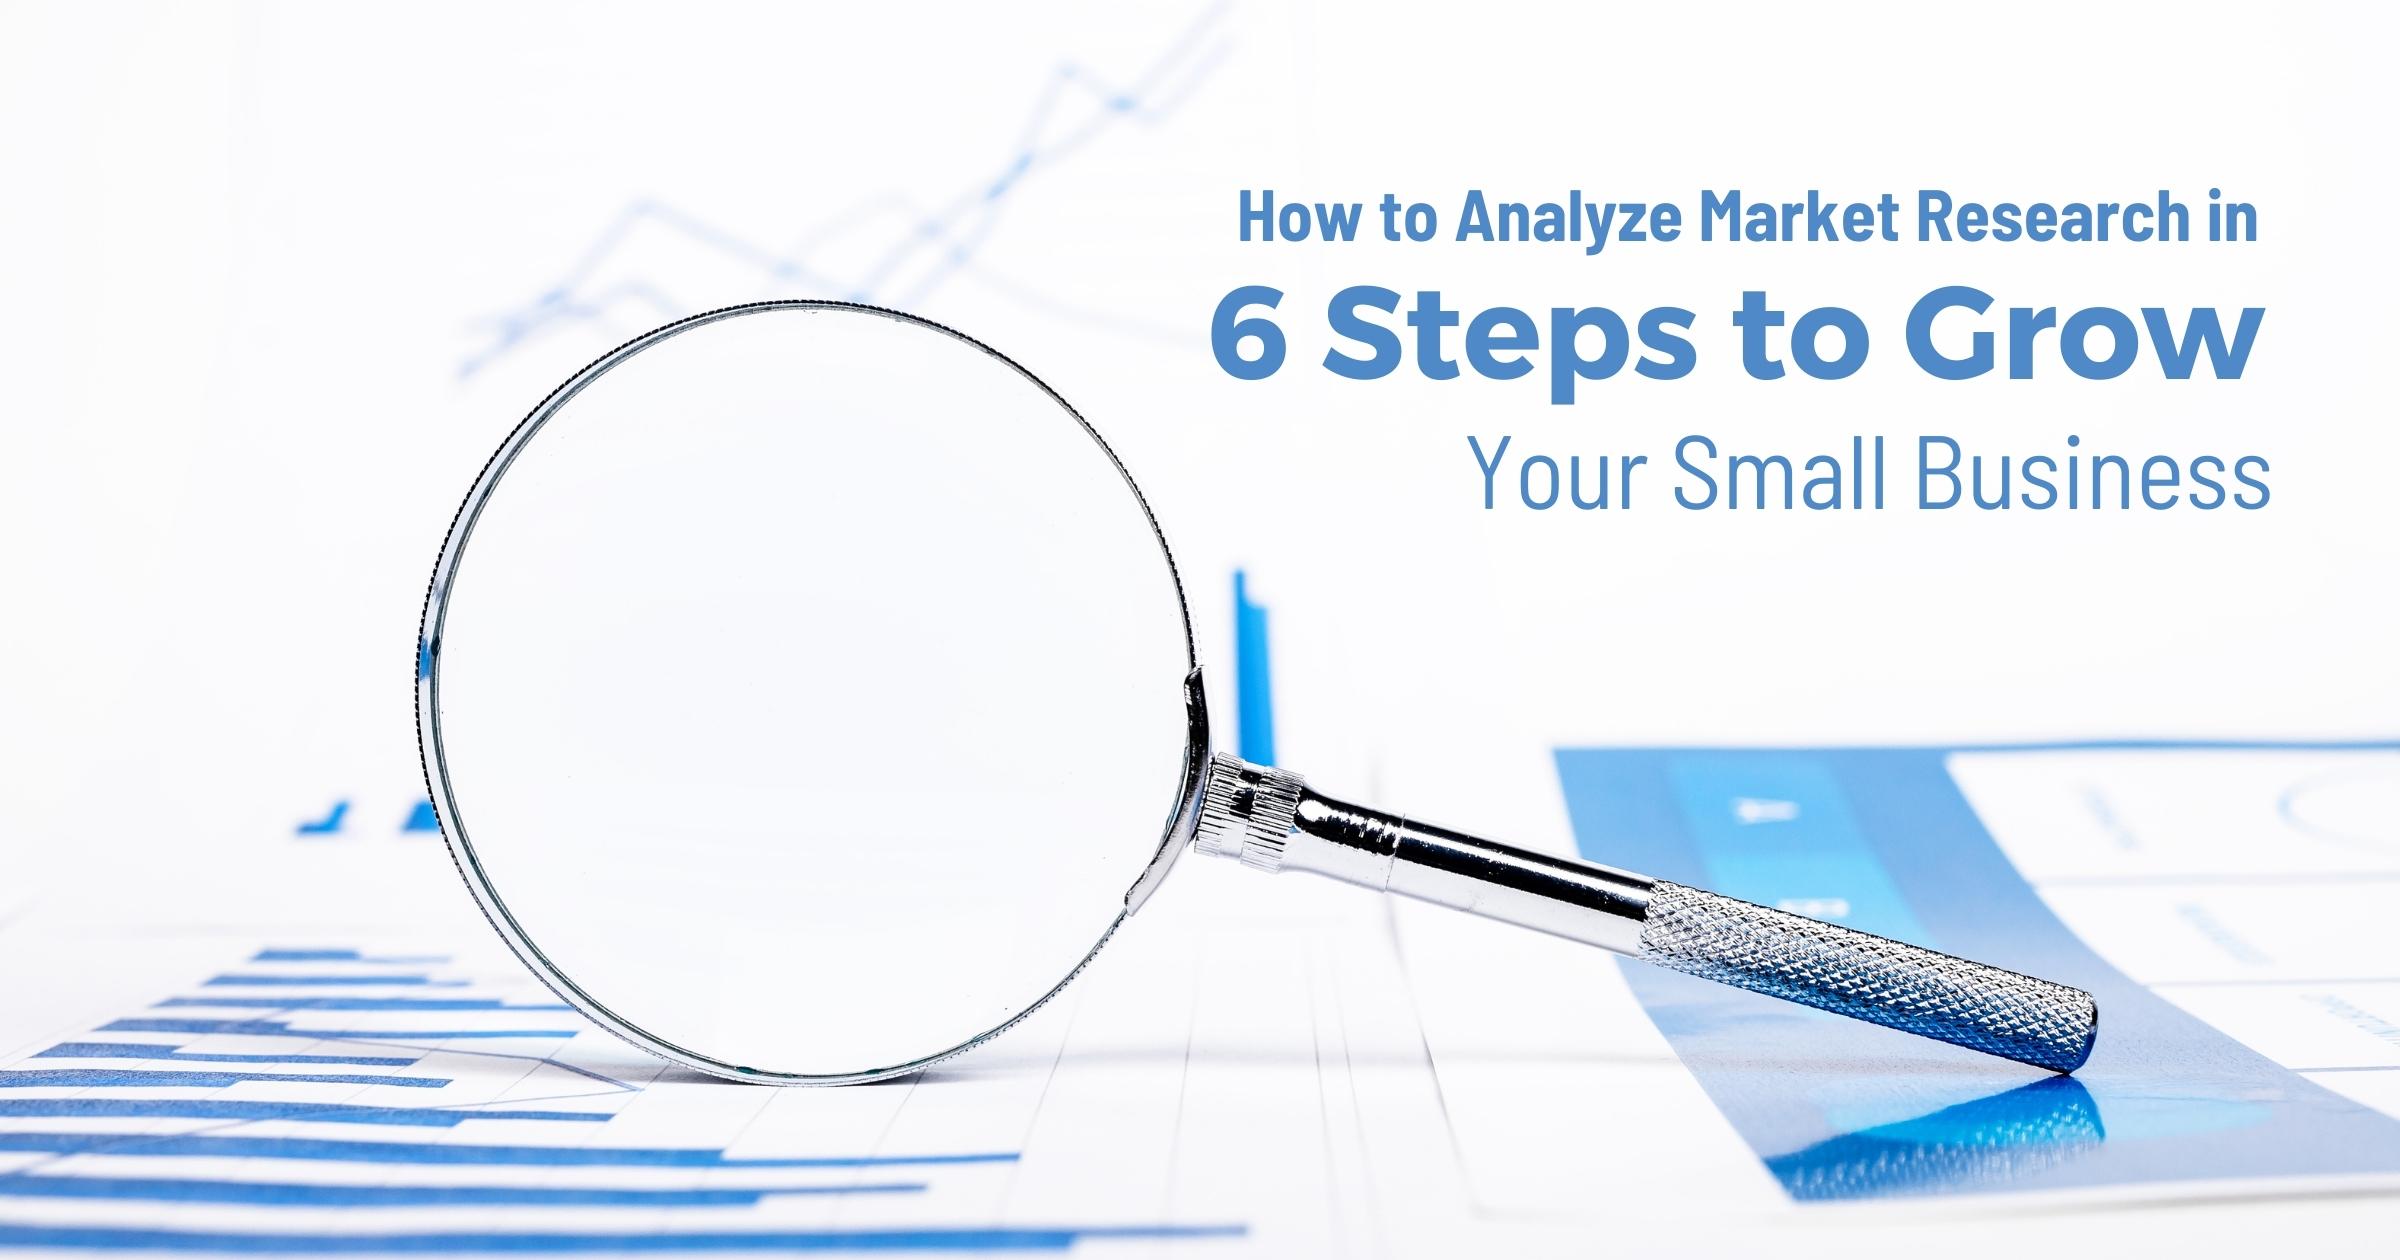 How To Analyze Market Research In 6 Steps To Grow Your Small Business